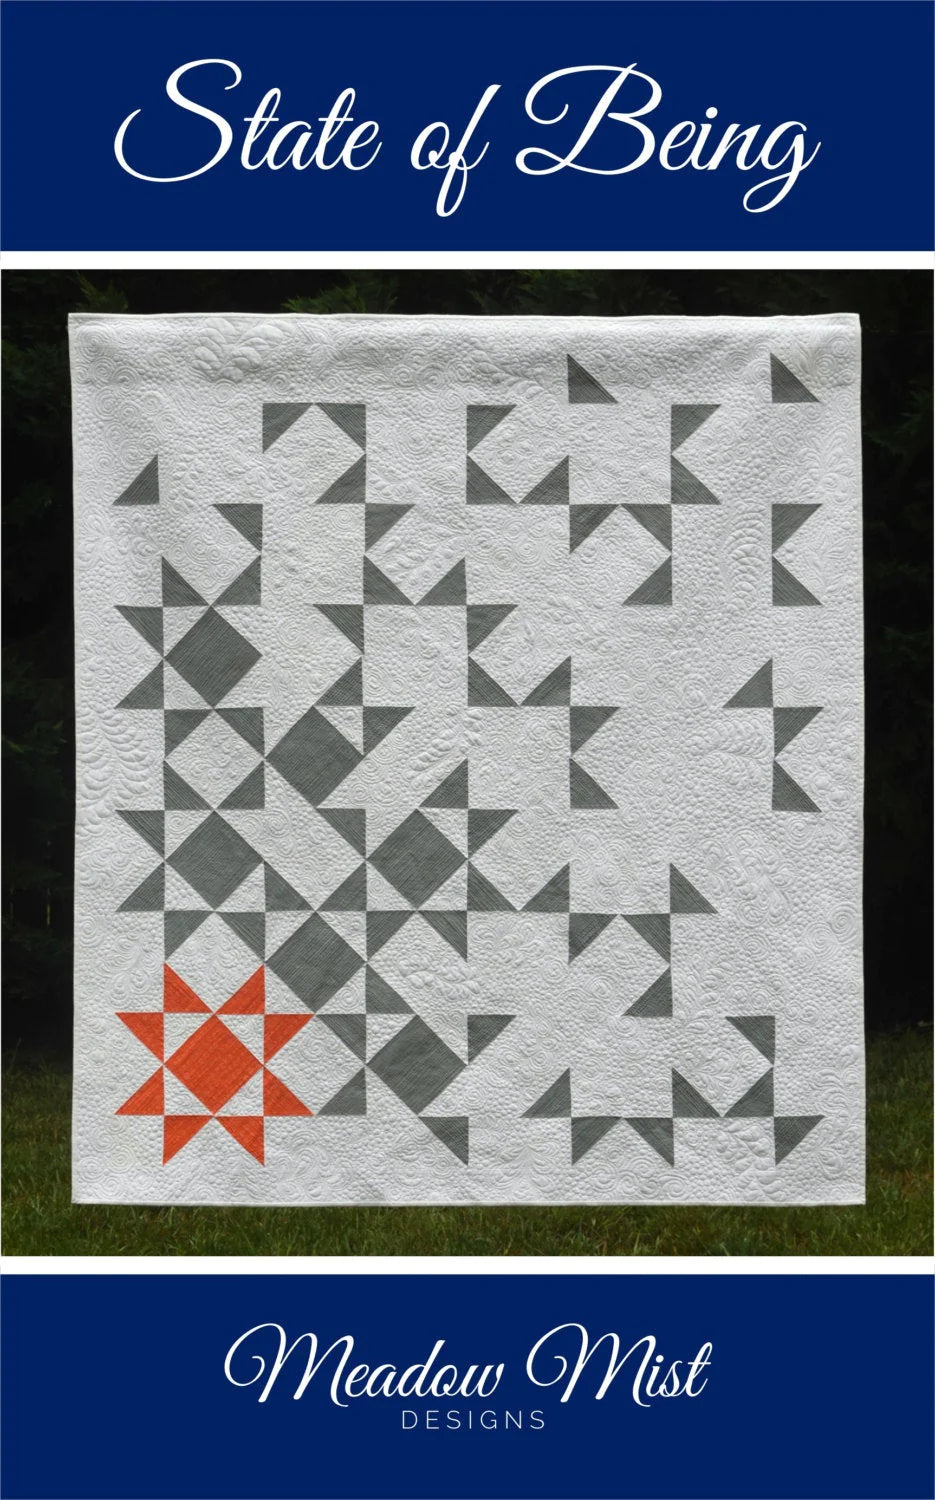 State of Being Quilt Pattern by Meadow Mist Designs